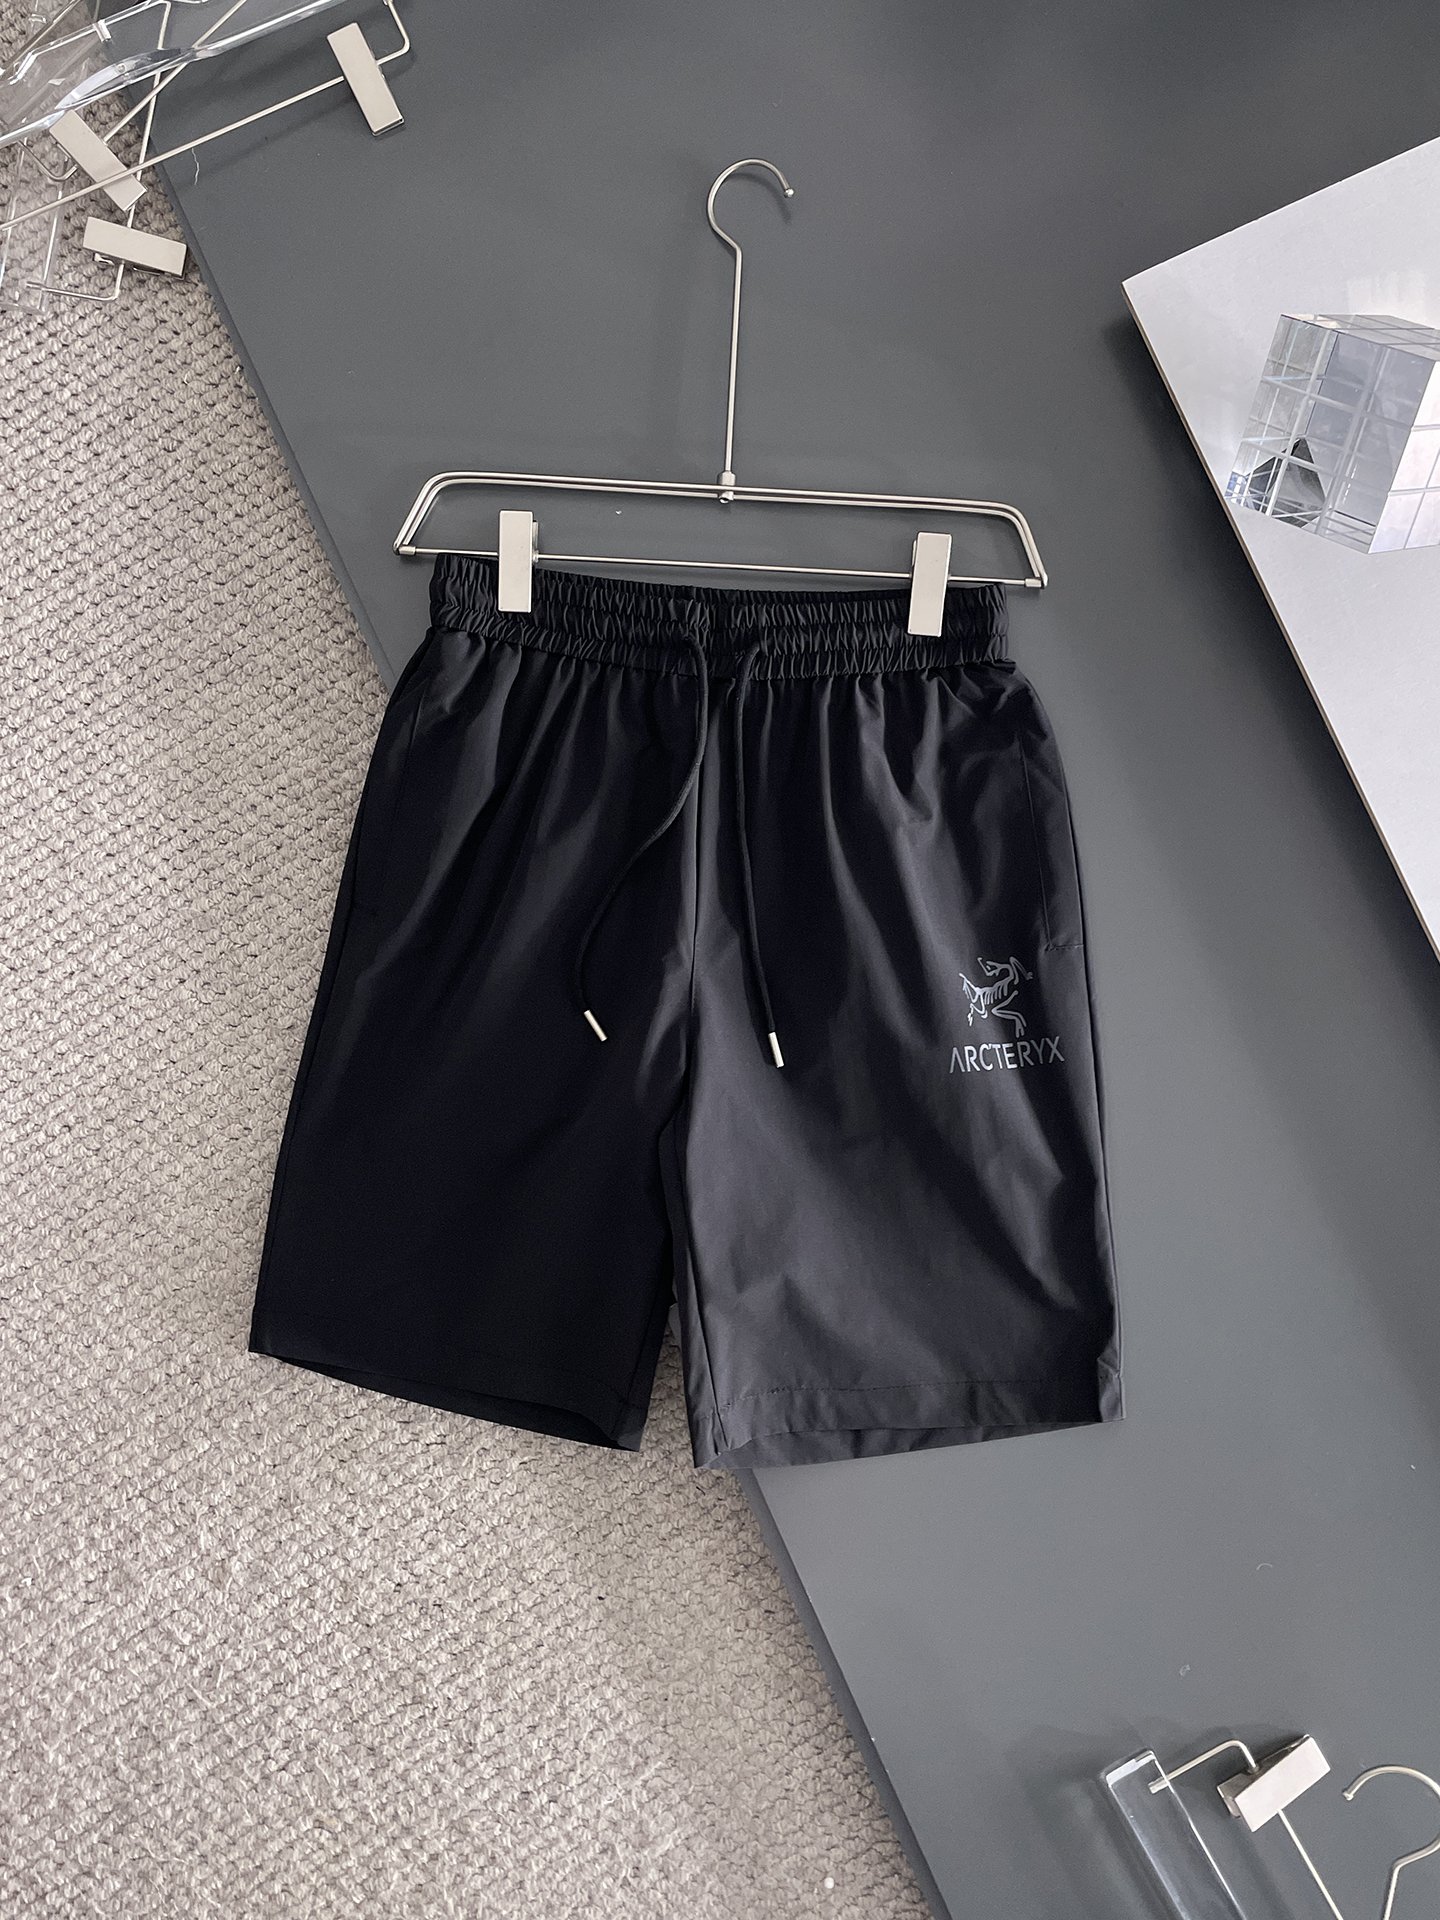 Arc’teryx Clothing Shorts Men Summer Collection Casual